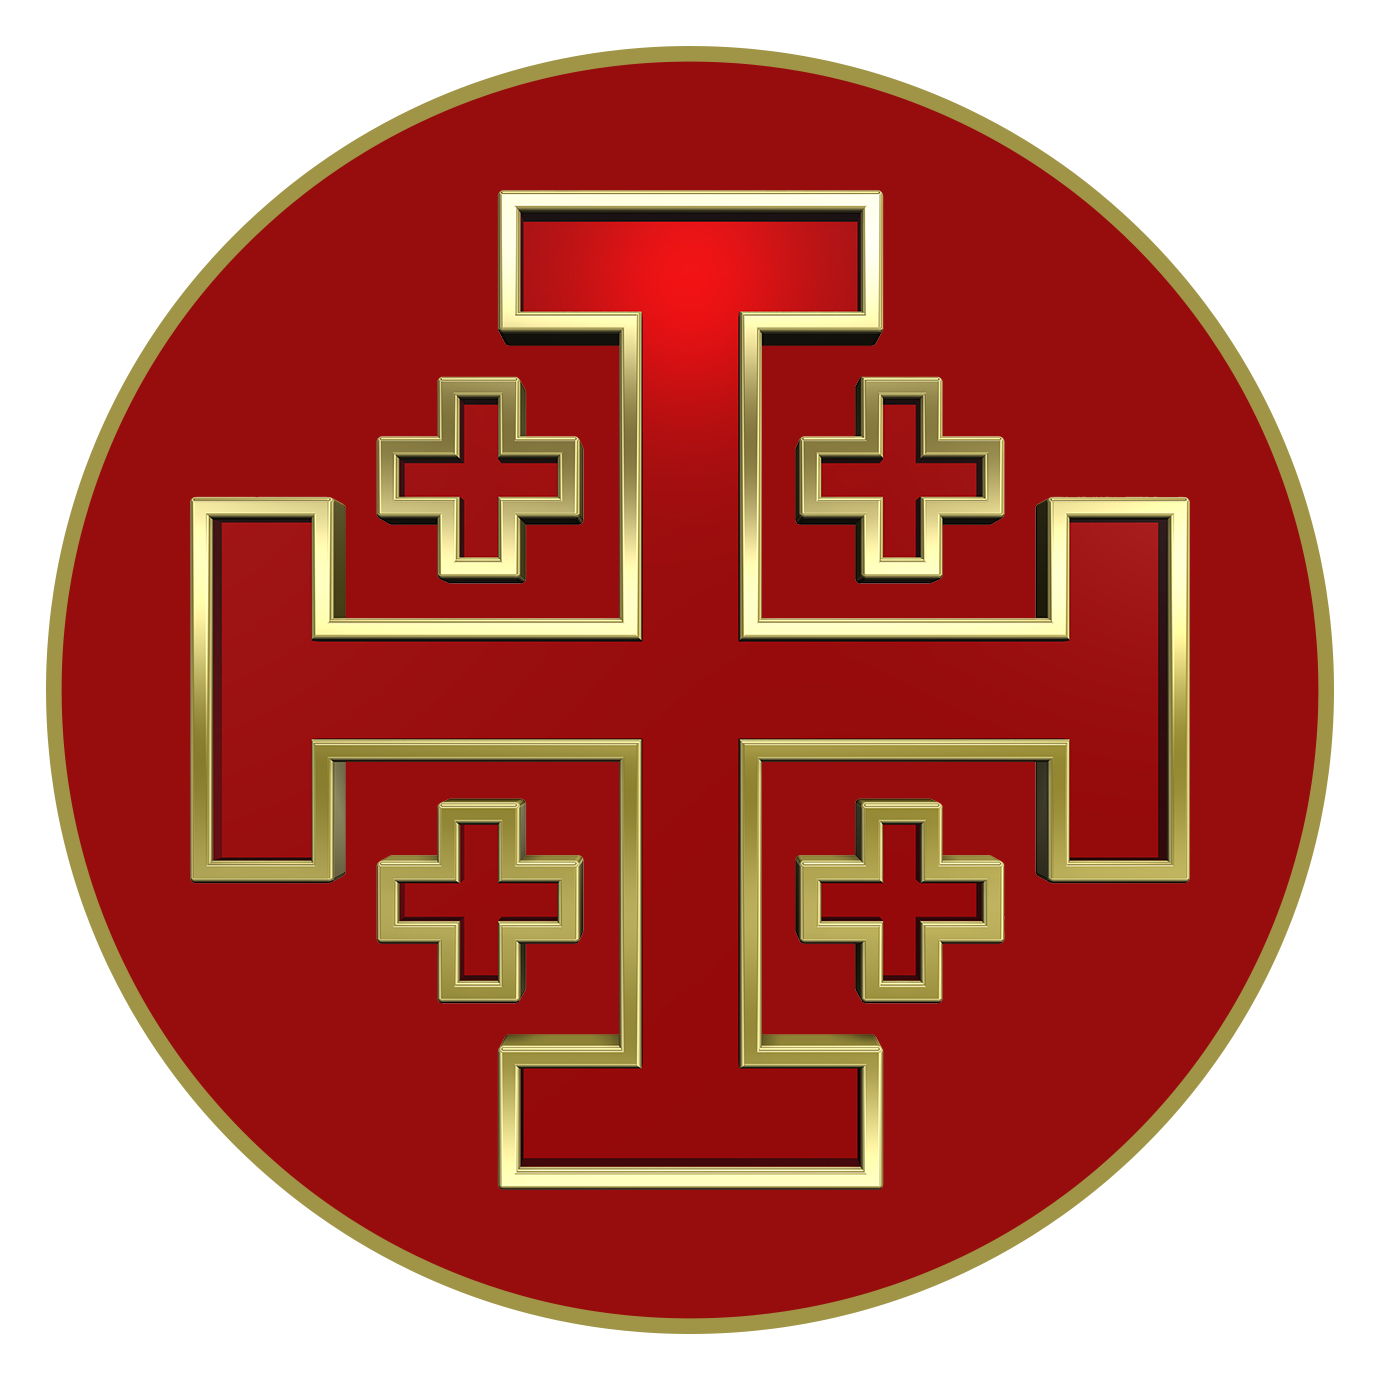 Order of the Most Precious Blood of Jesus Christ